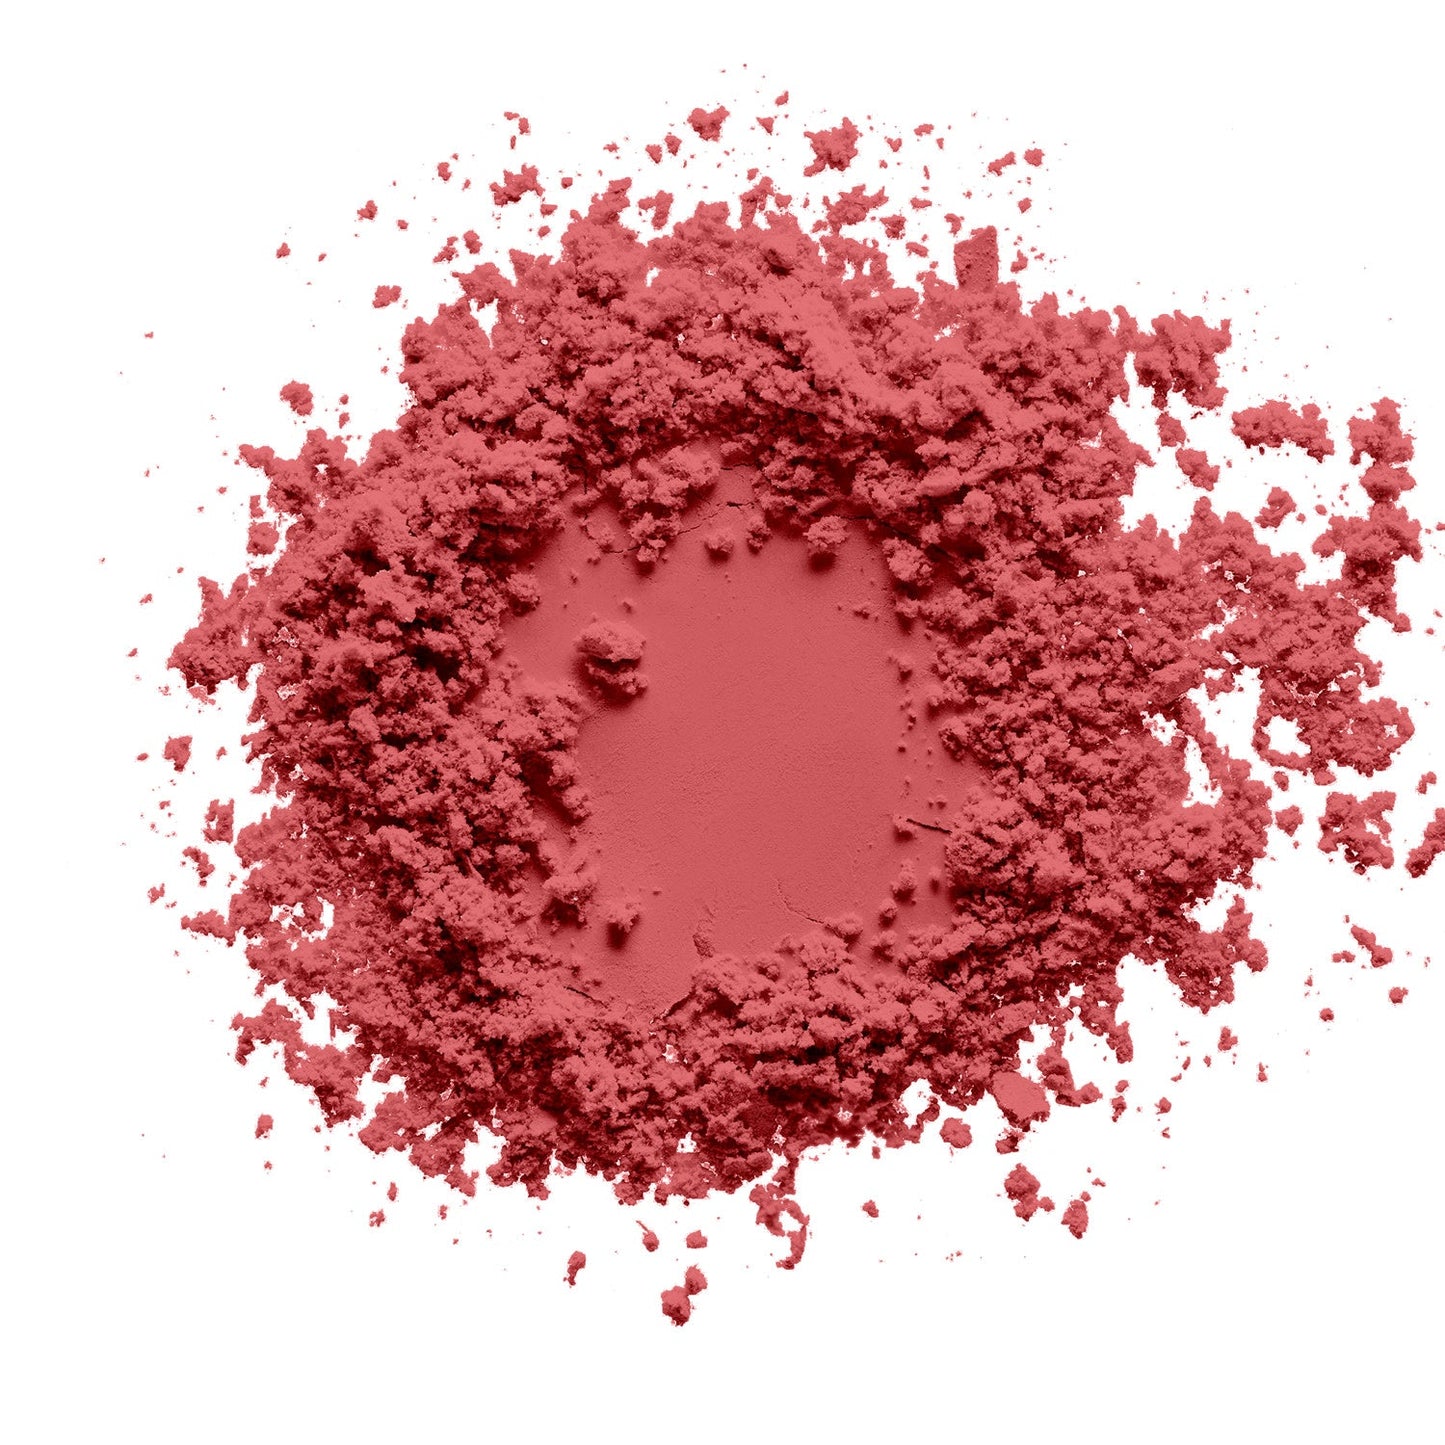 a swatch of fantastic rose tone of a vegan high quality pigmented talc free blush on a white canvas